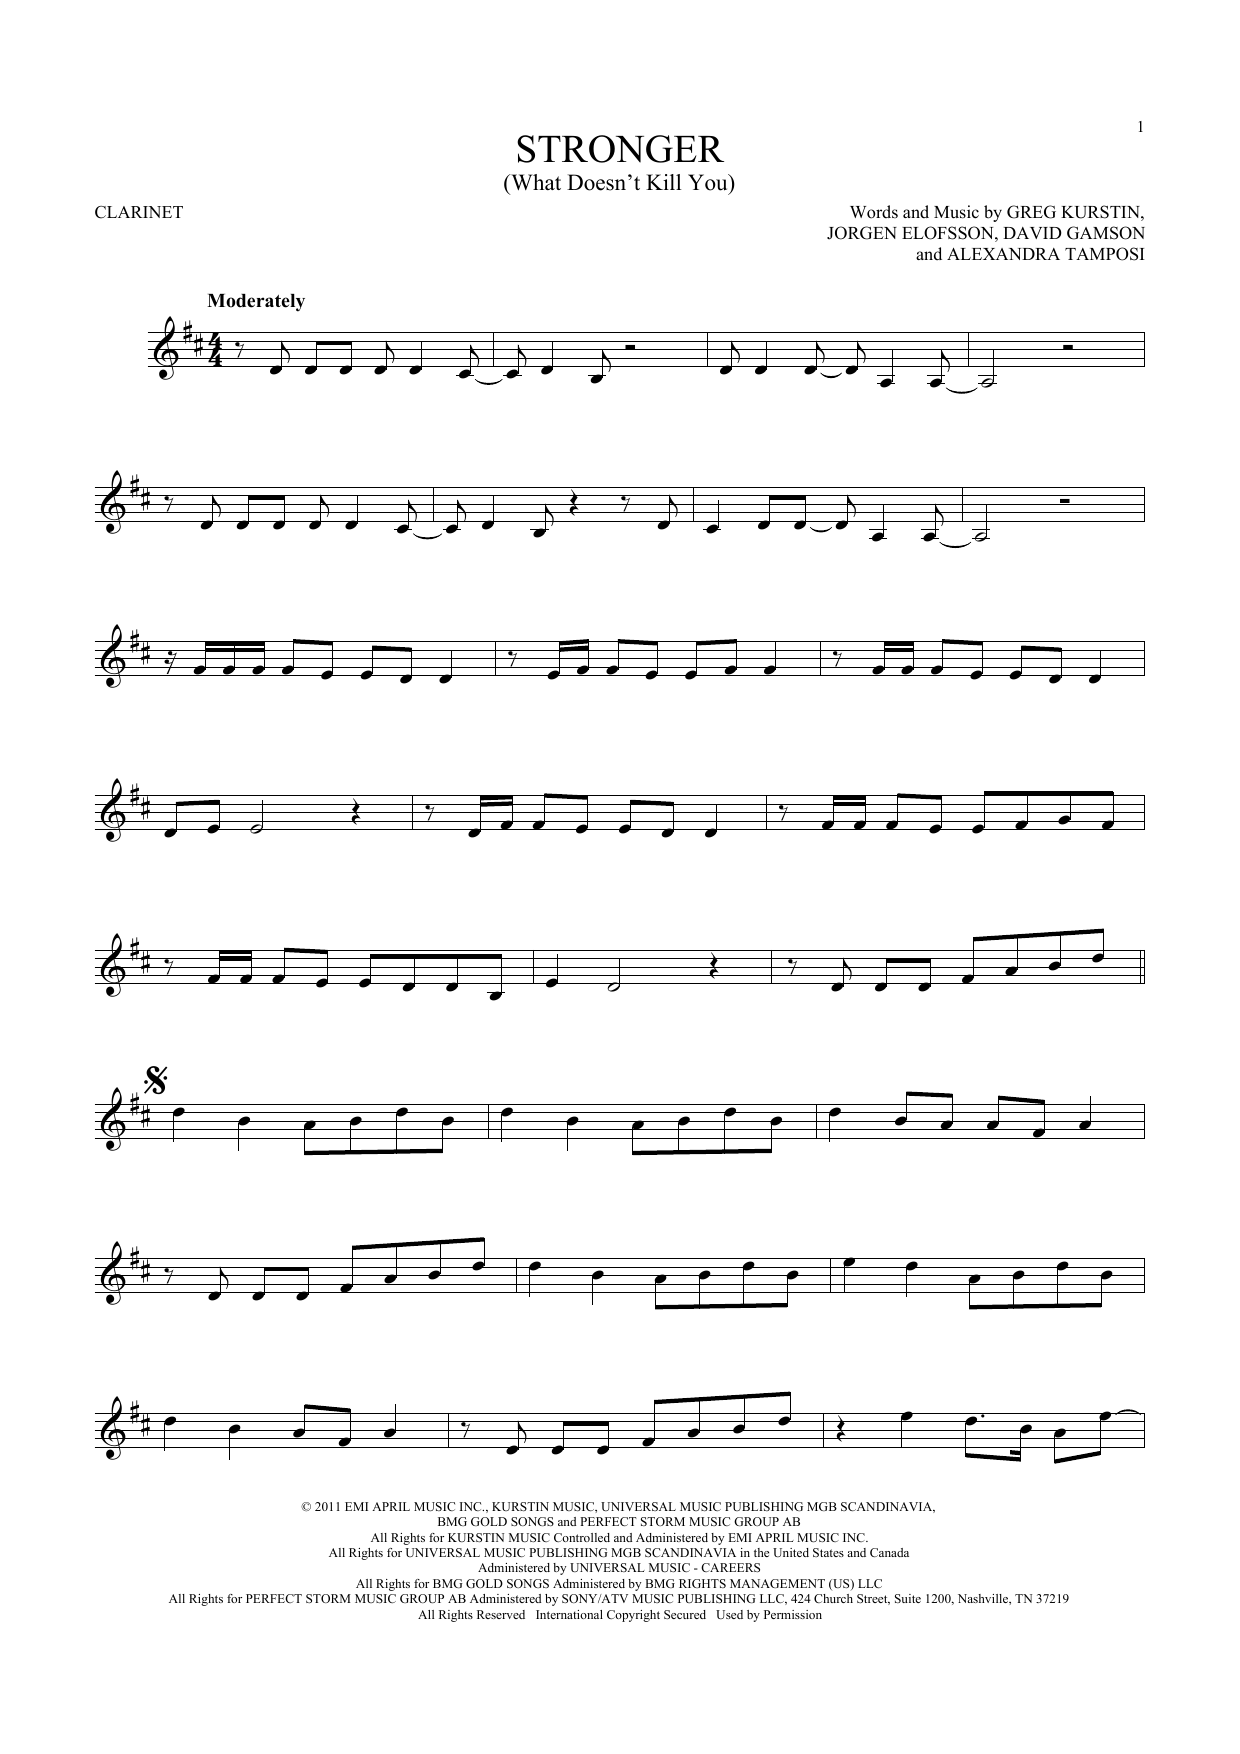 Download Kelly Clarkson Stronger (What Doesn't Kill You) Sheet Music